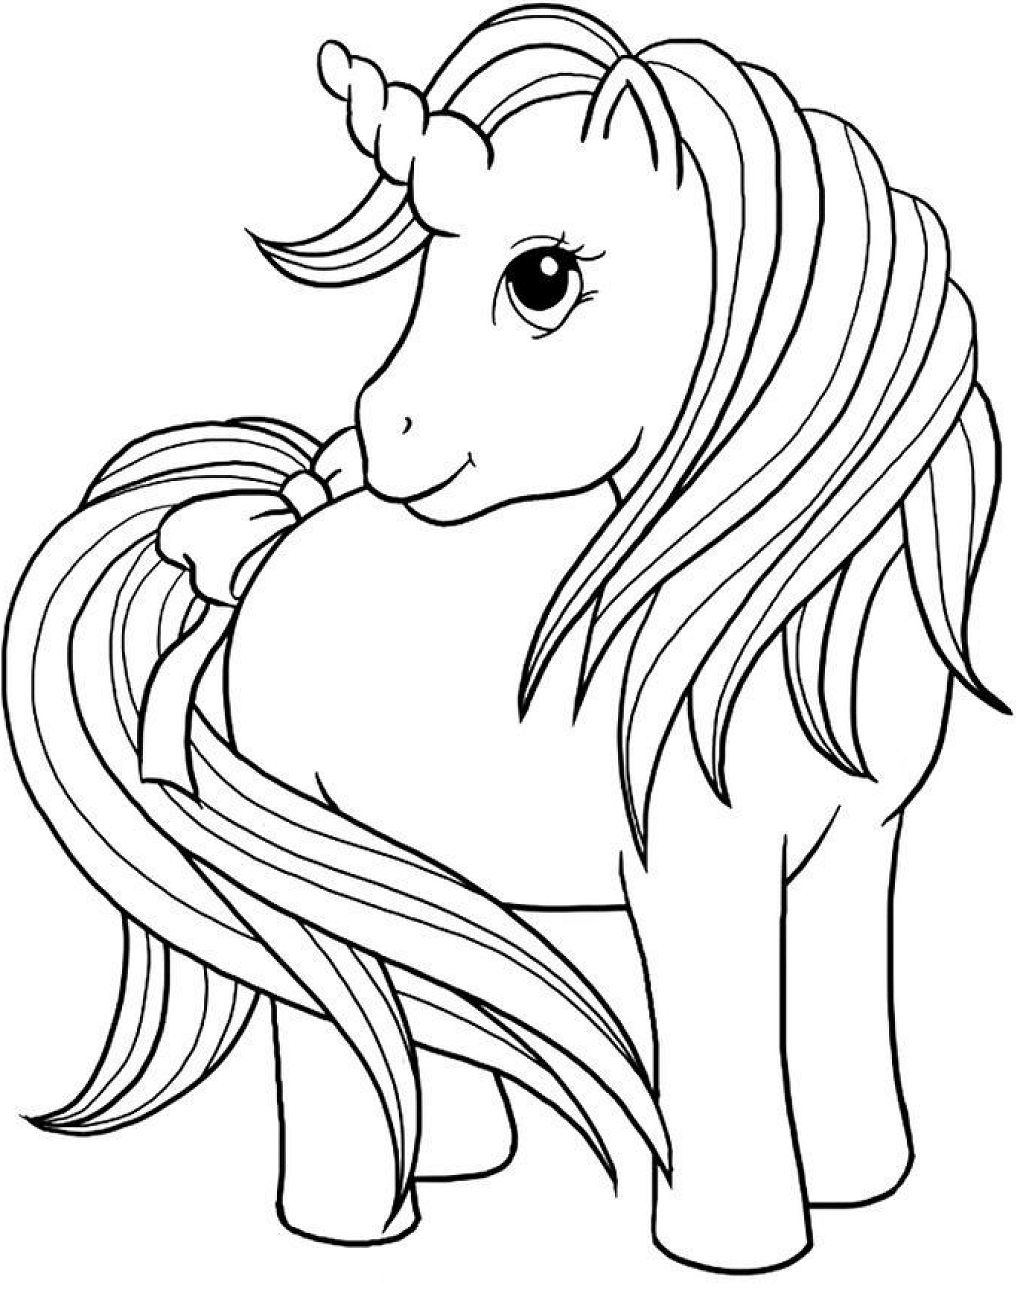 Unicorn With Bow At Tail